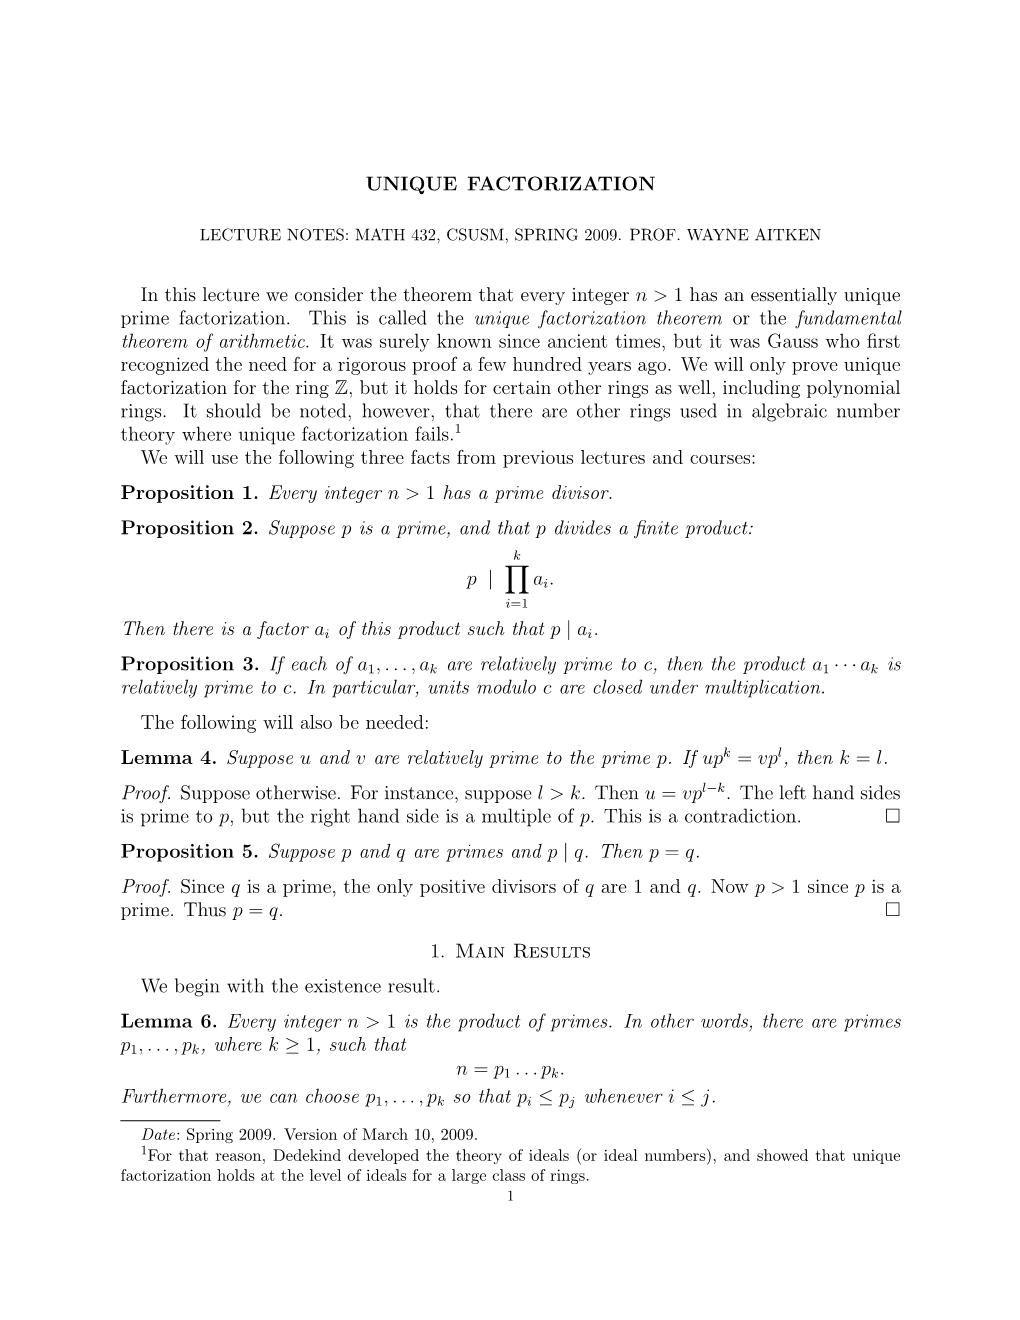 UNIQUE FACTORIZATION in This Lecture We Consider the Theorem